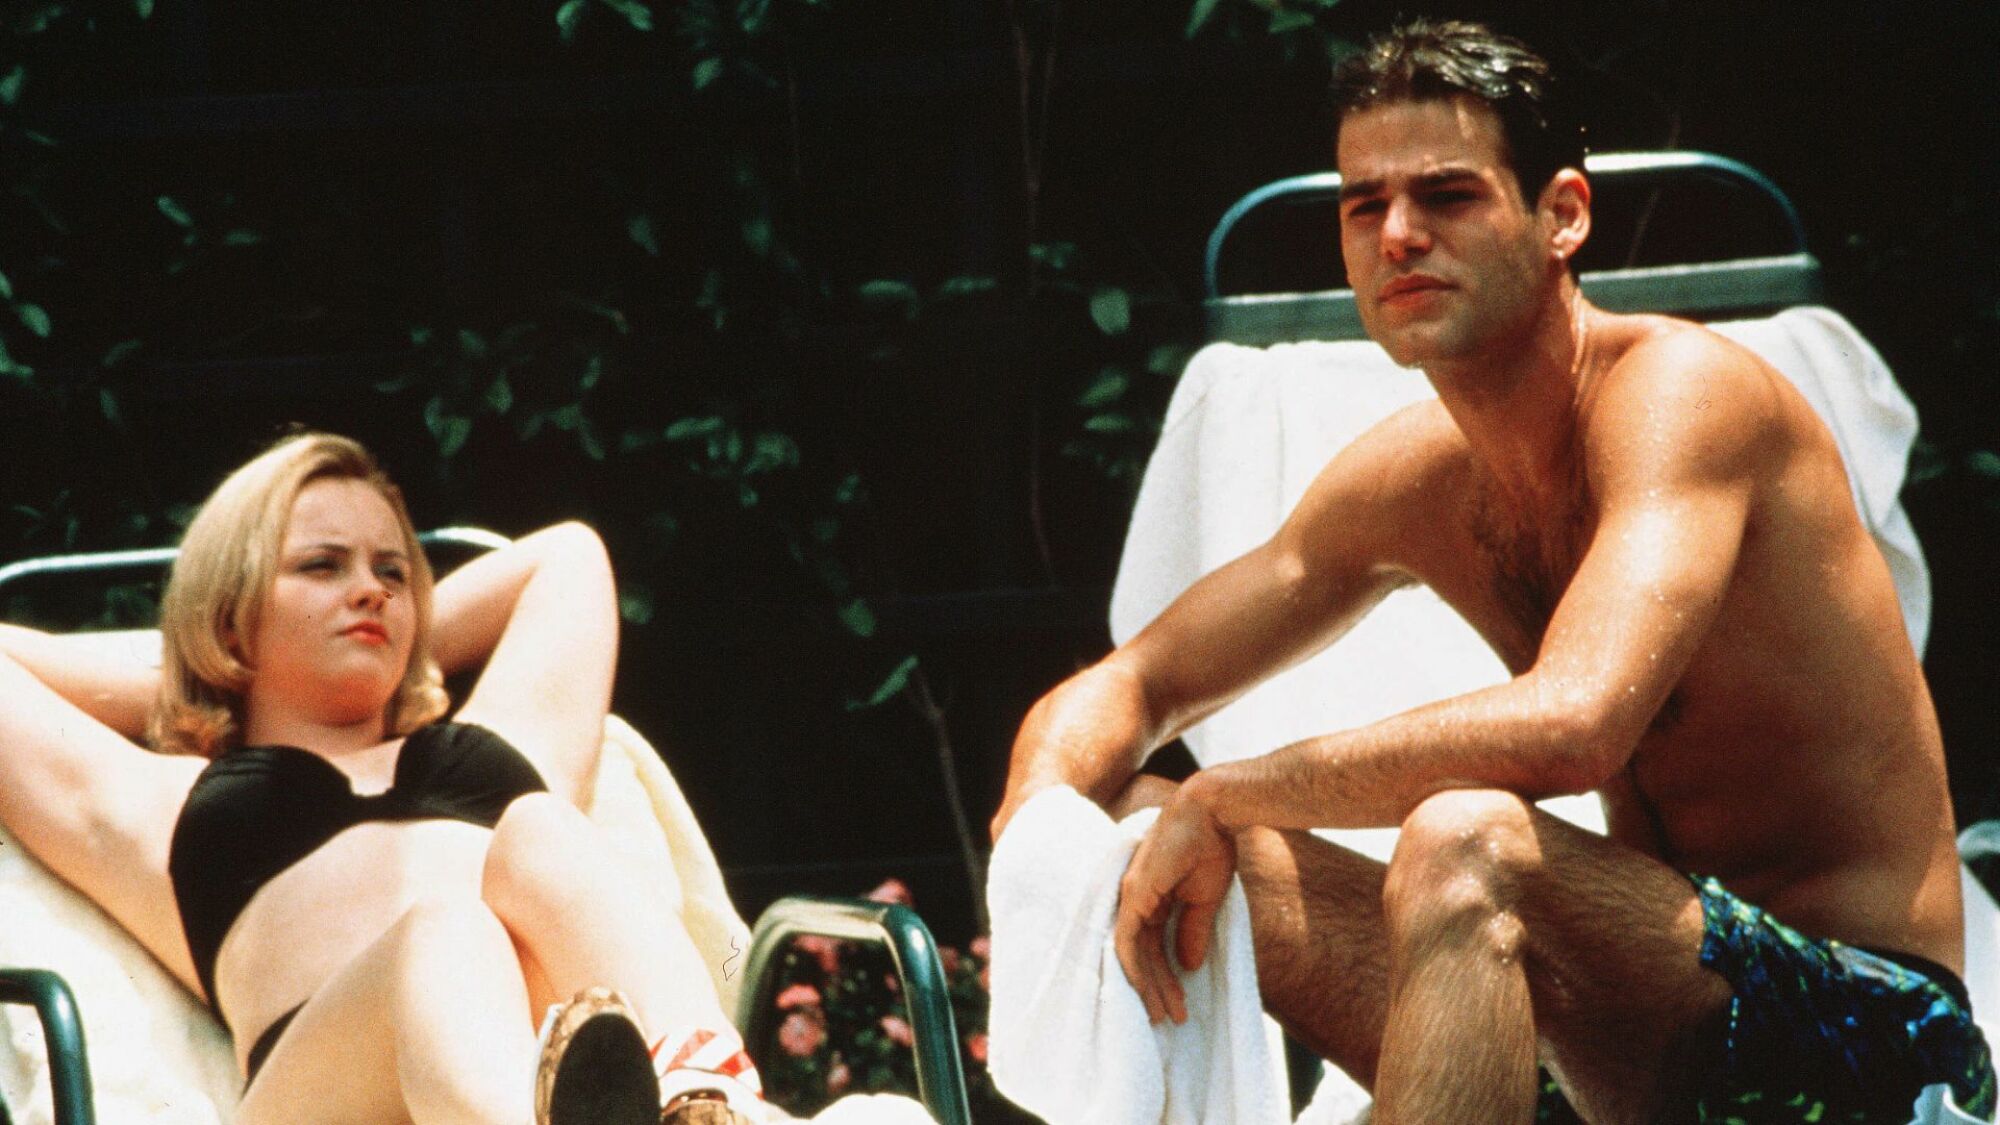 Christina Ricci and Ivan Sergei lounge poolside in "The Opposite of Sex."